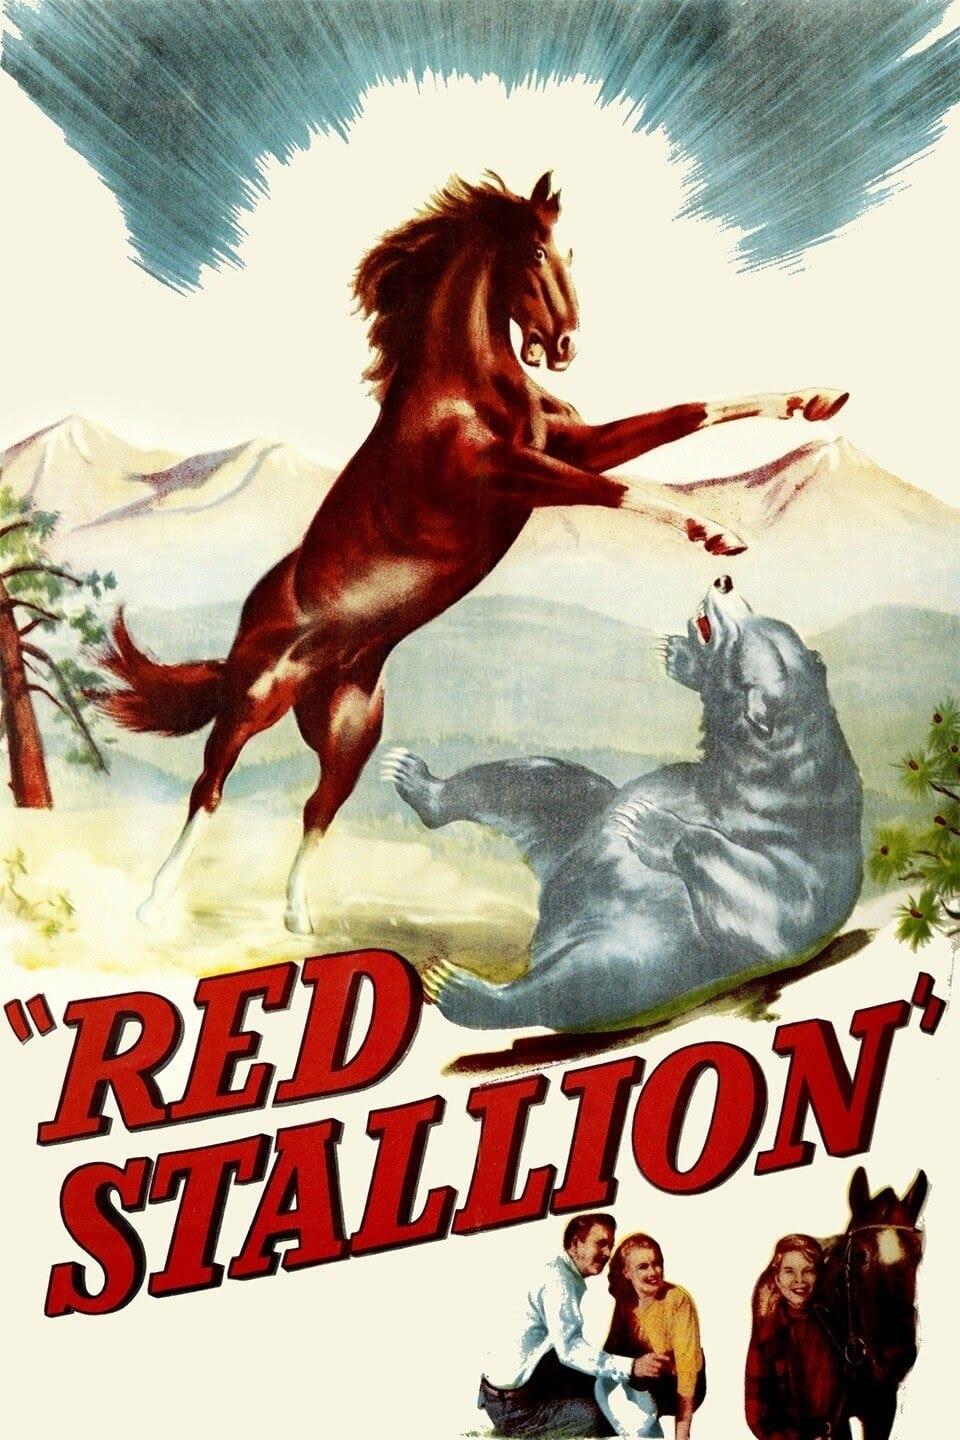 The Red Stallion poster